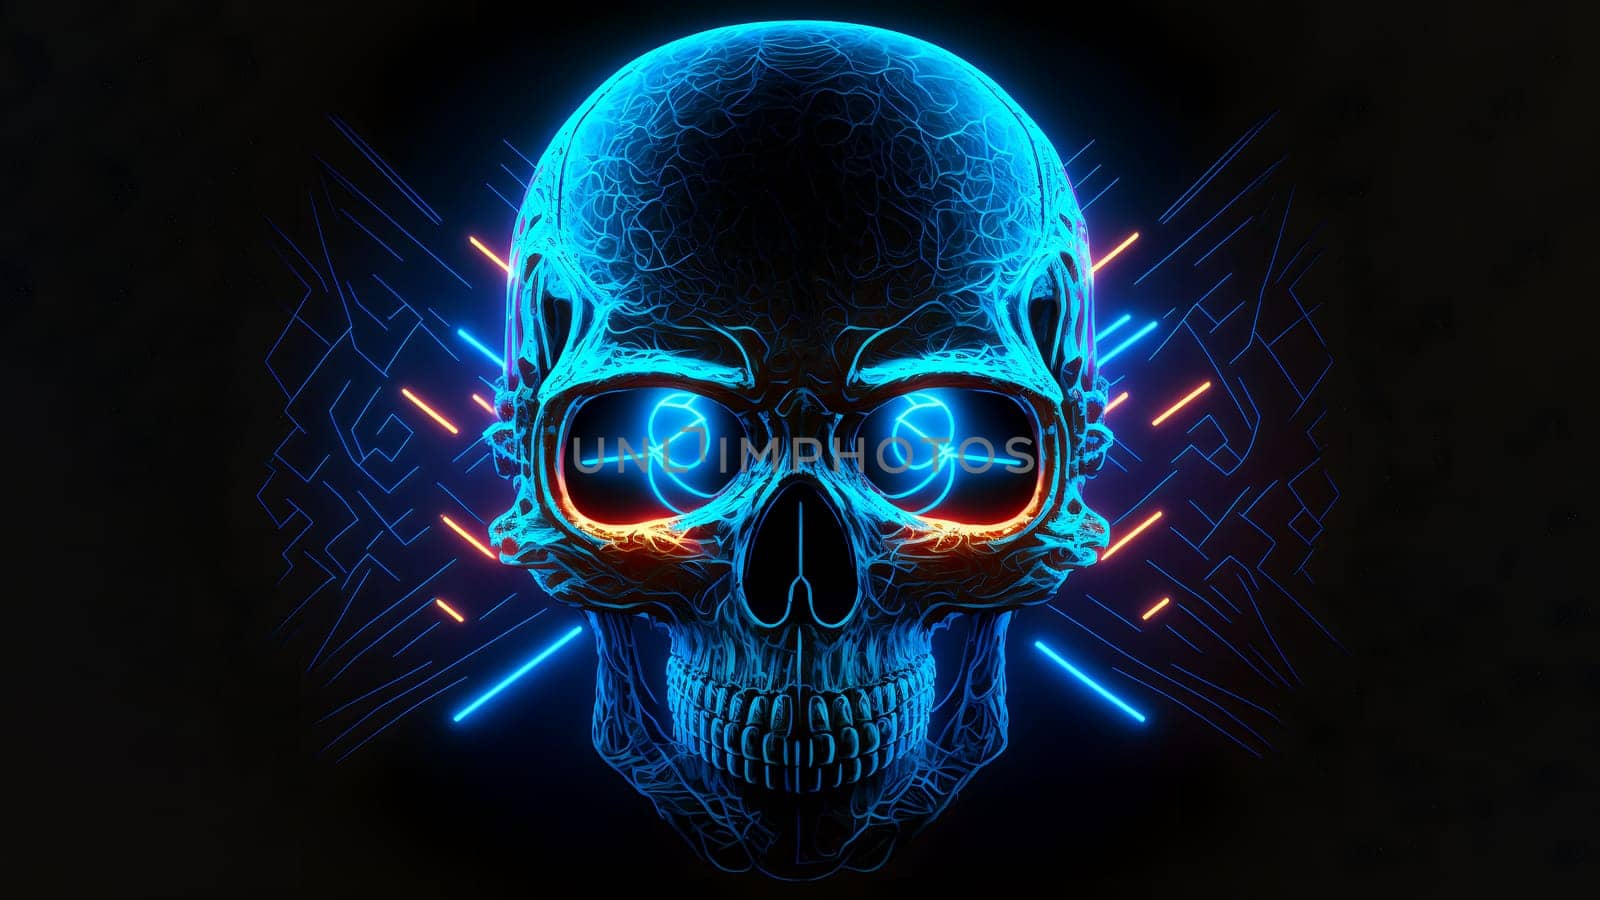 neon skull on black background, neural network generated art by z1b